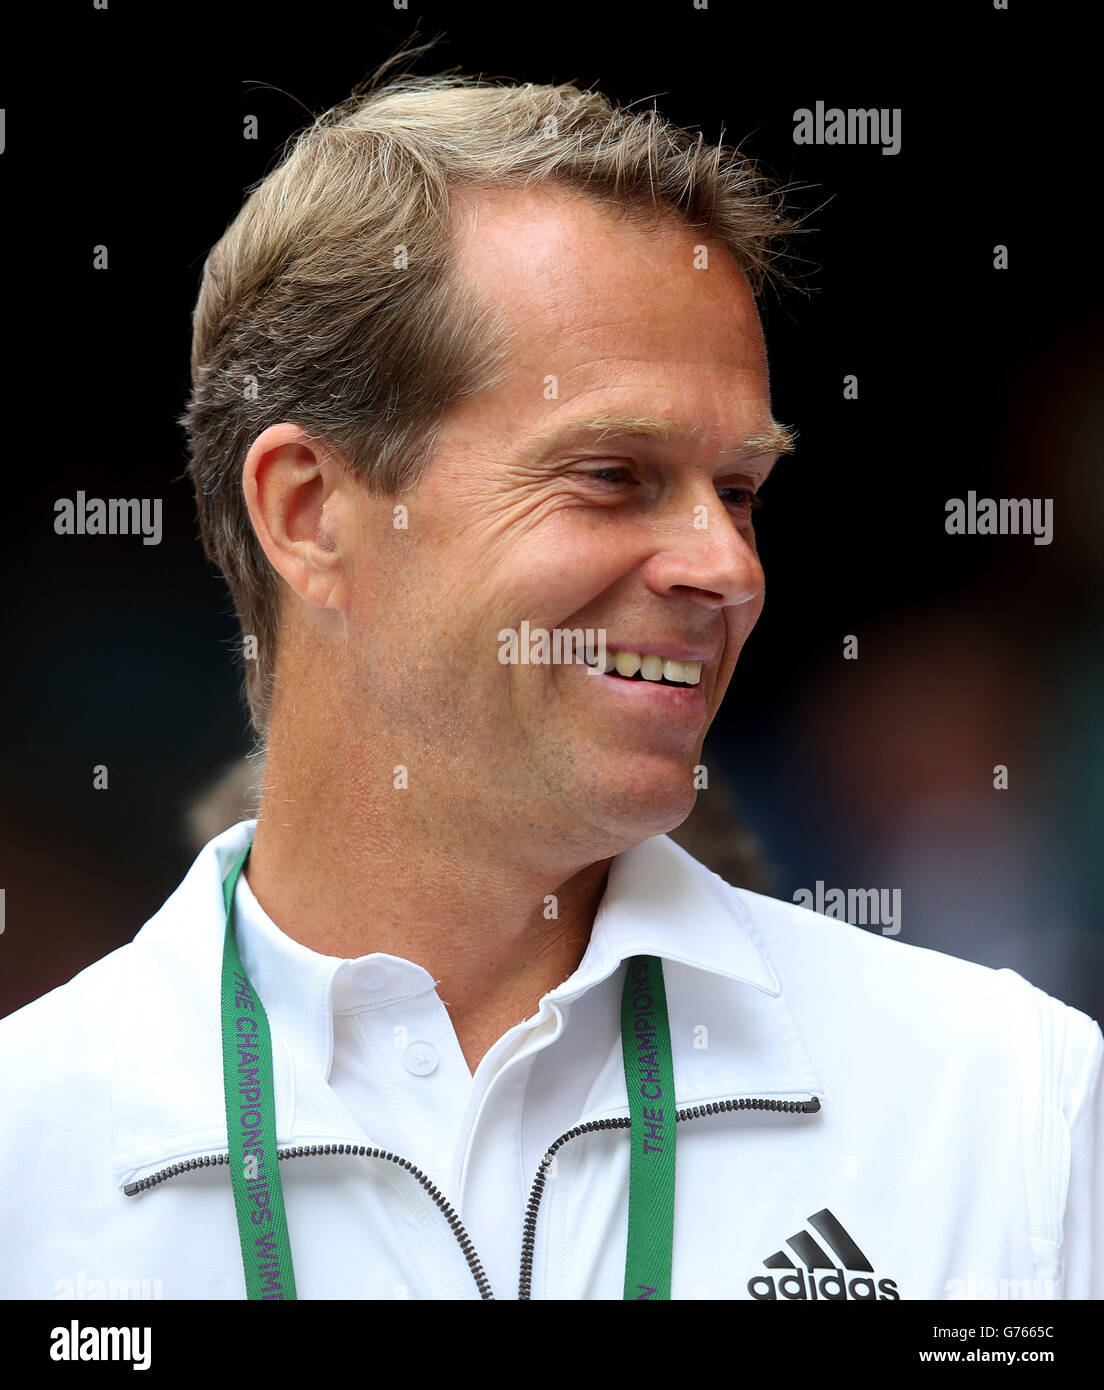 Stefan Edberg, coach of Switzerland's Roger Federer in the players box for the Mens singles final during day fourteen of the Wimbledon Championships at the All England Lawn Tennis and Croquet Club, Wimbledon. Stock Photo